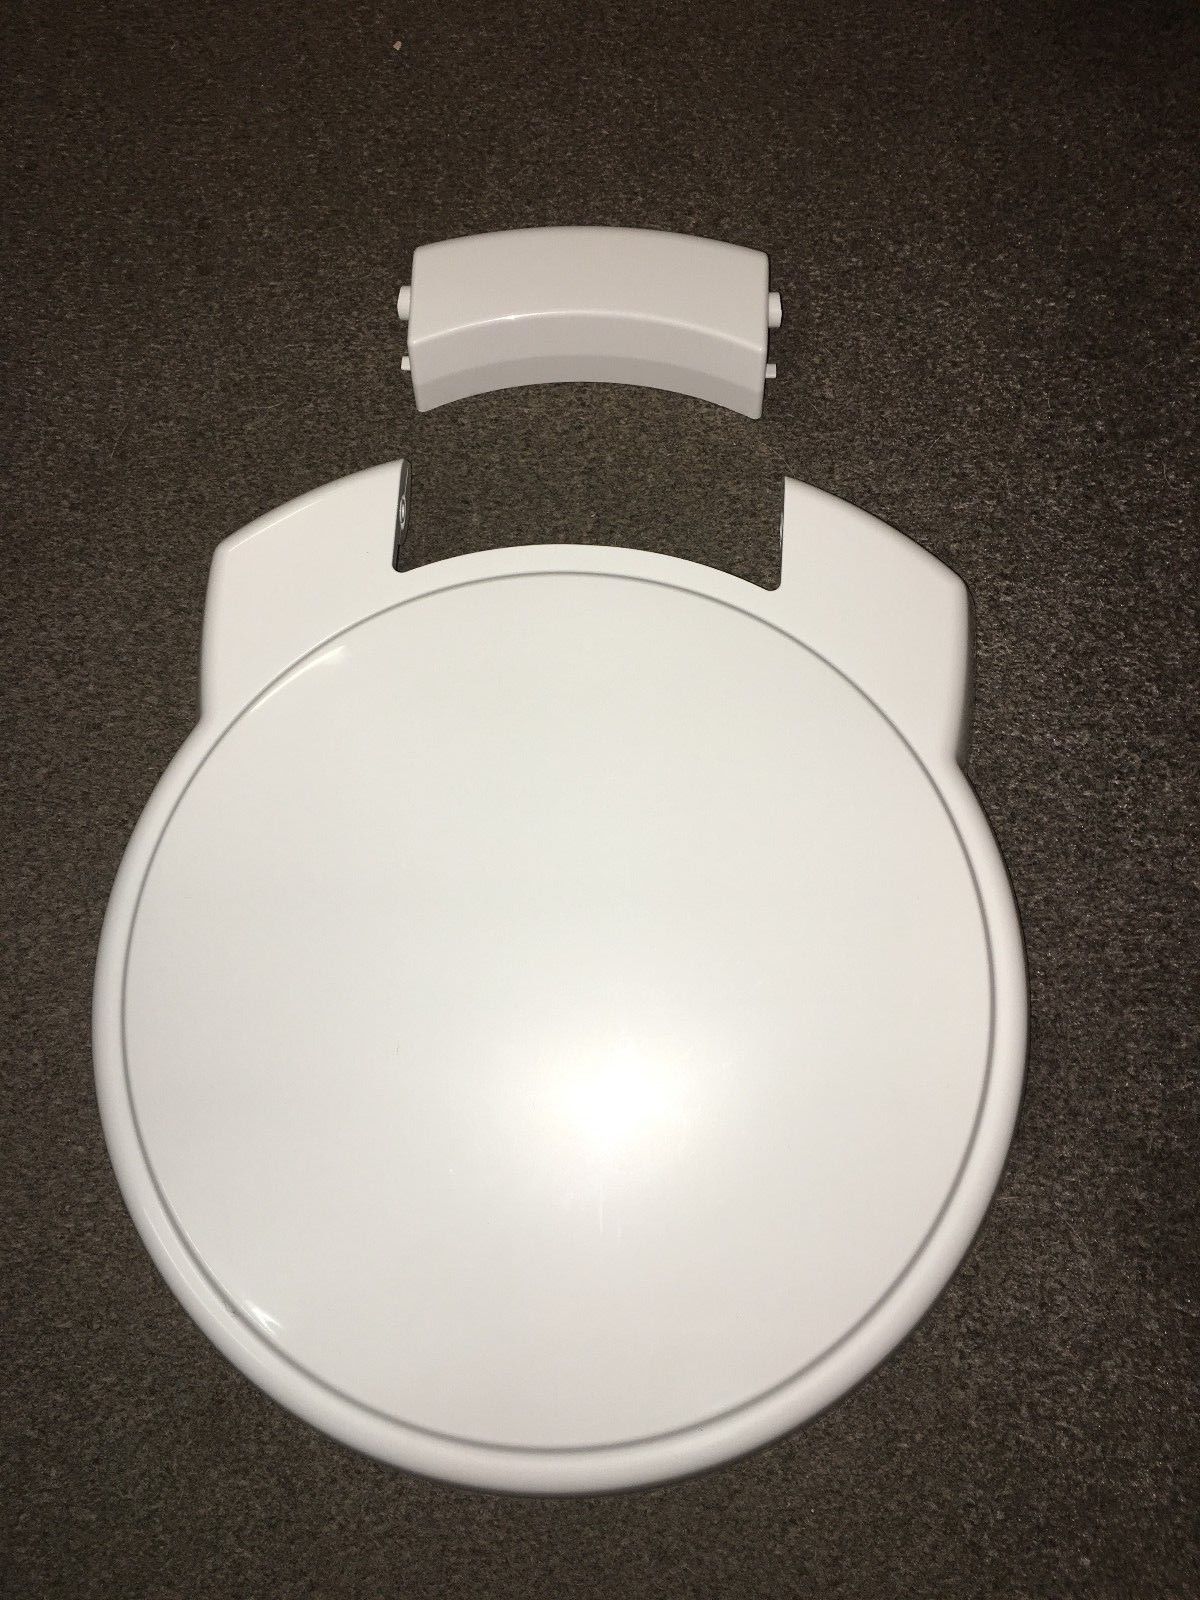 Thetford Toilet Seat and Cover -SC250 / 260 models - 9340162 - Caratech Caravan Parts